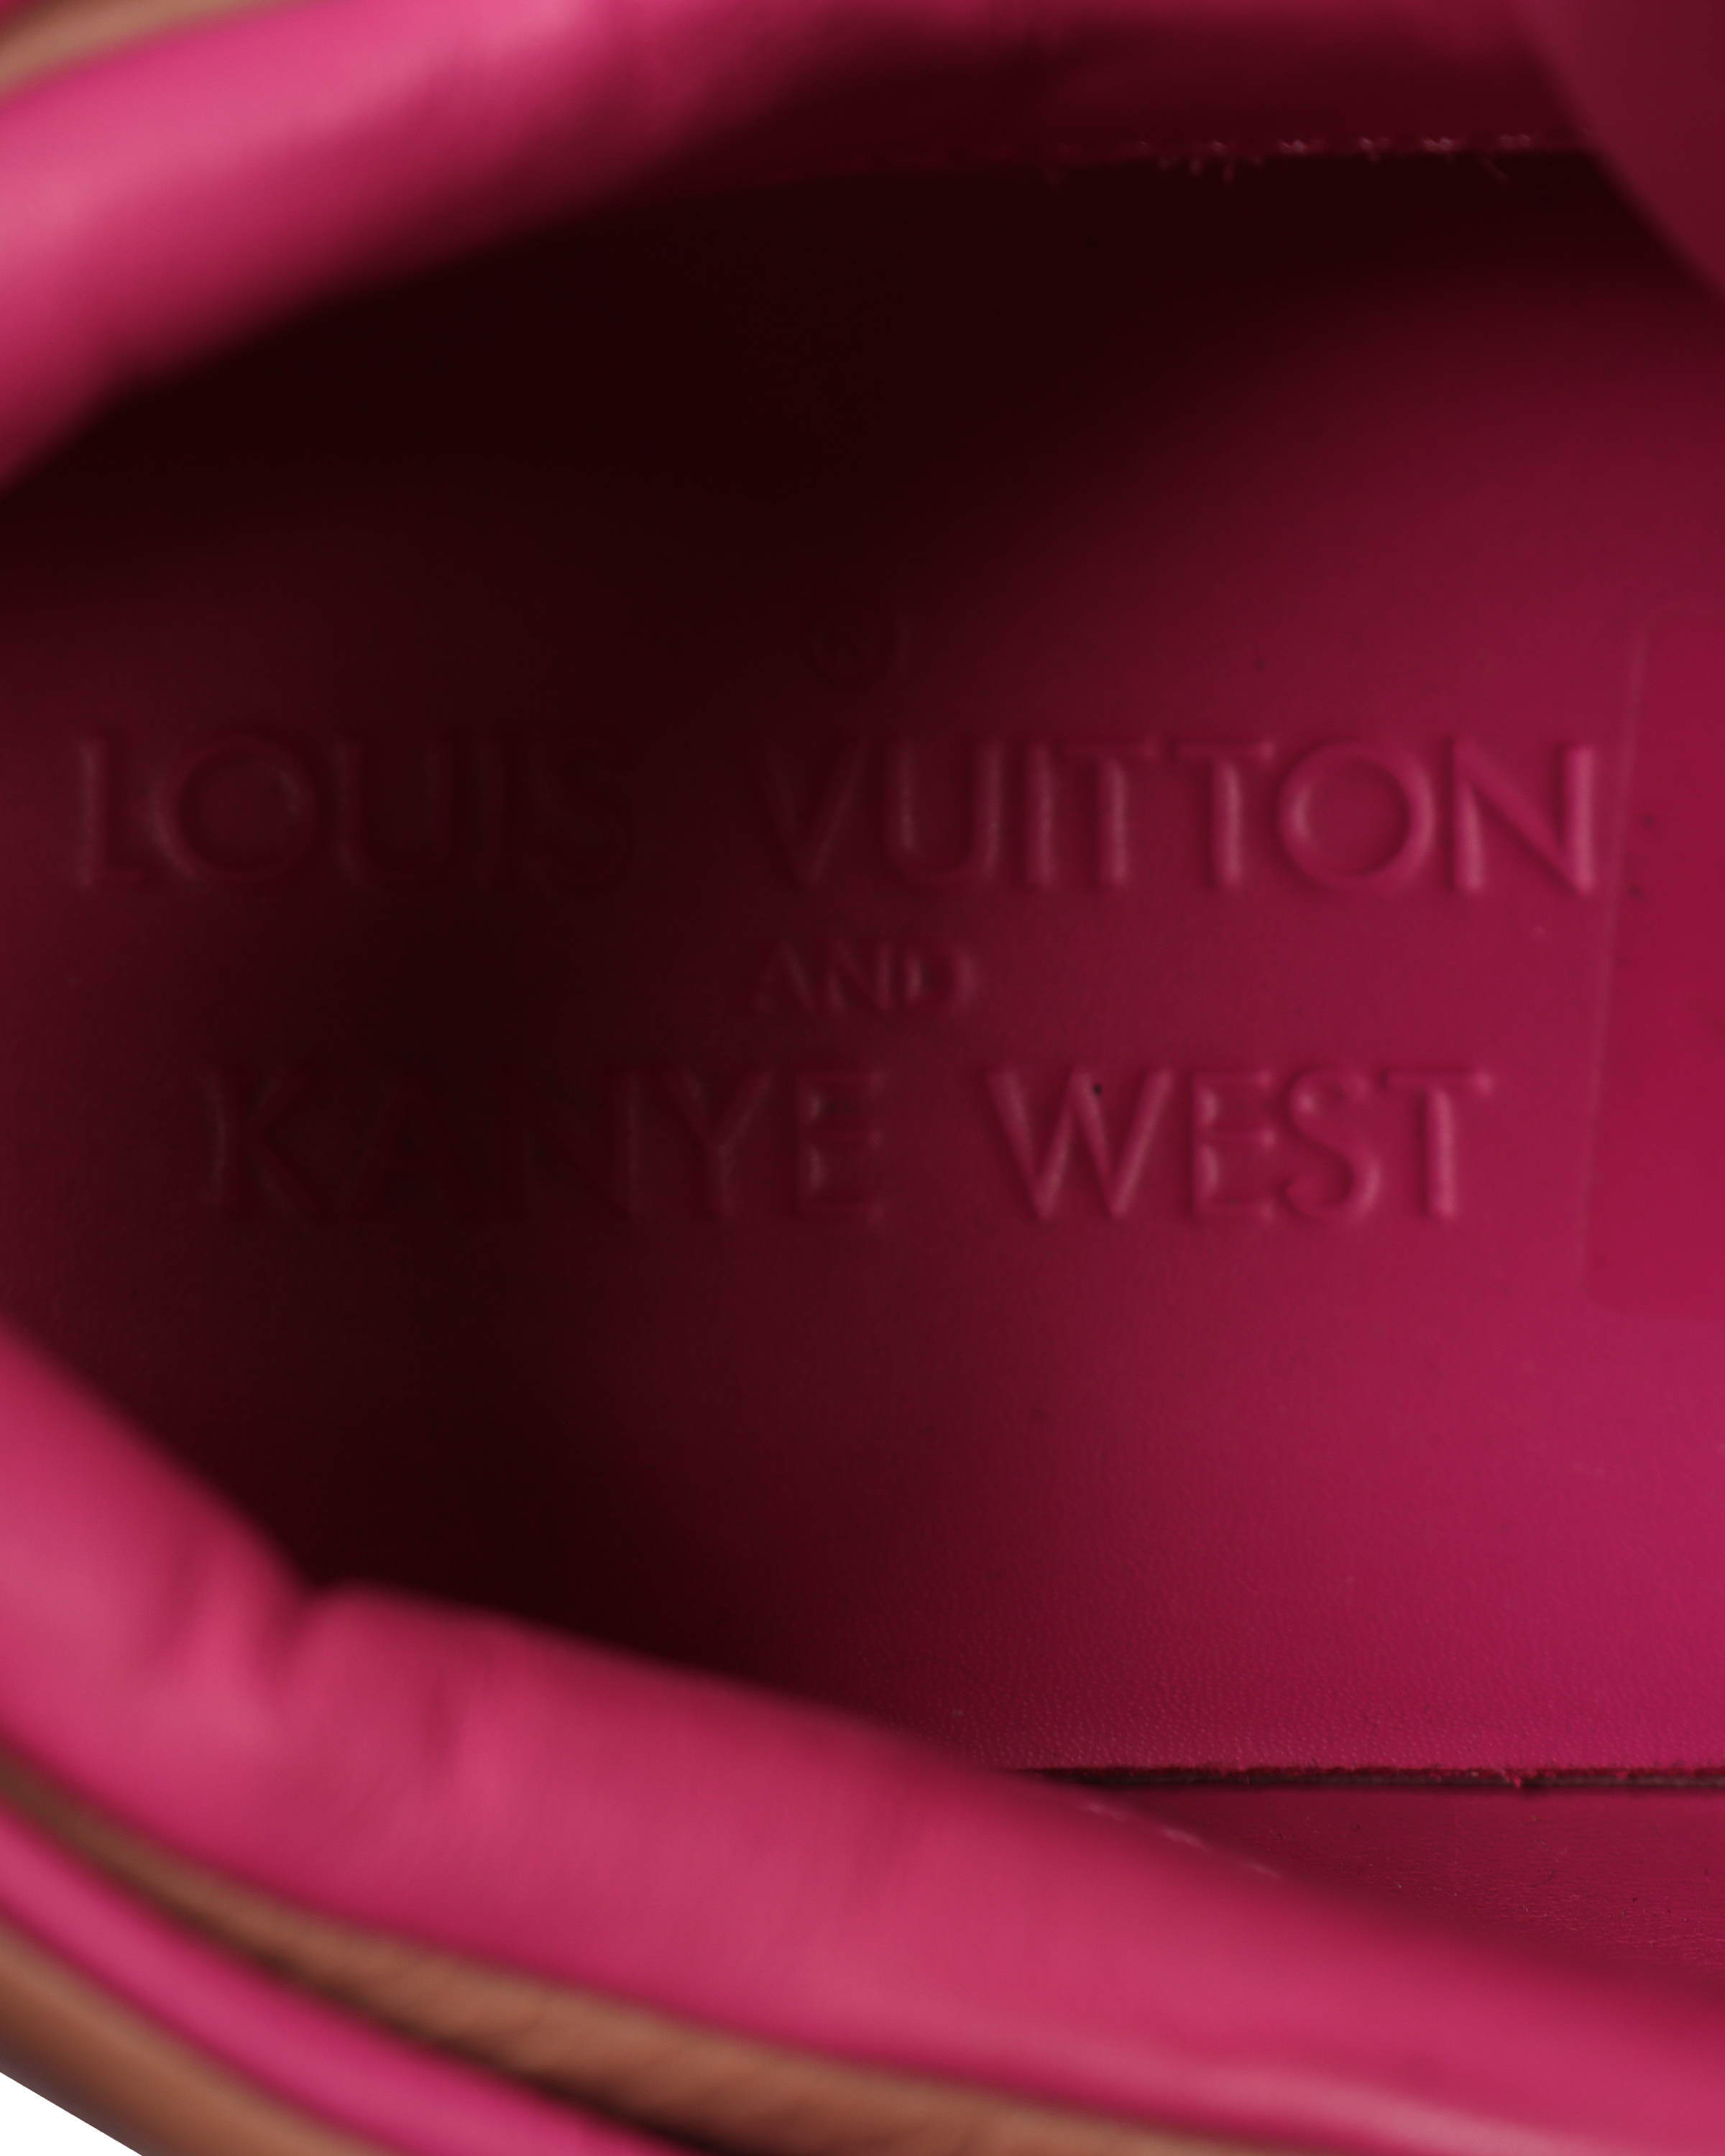 Louis Vuitton x Kanye West Patchwork Dons LV Rare Limited